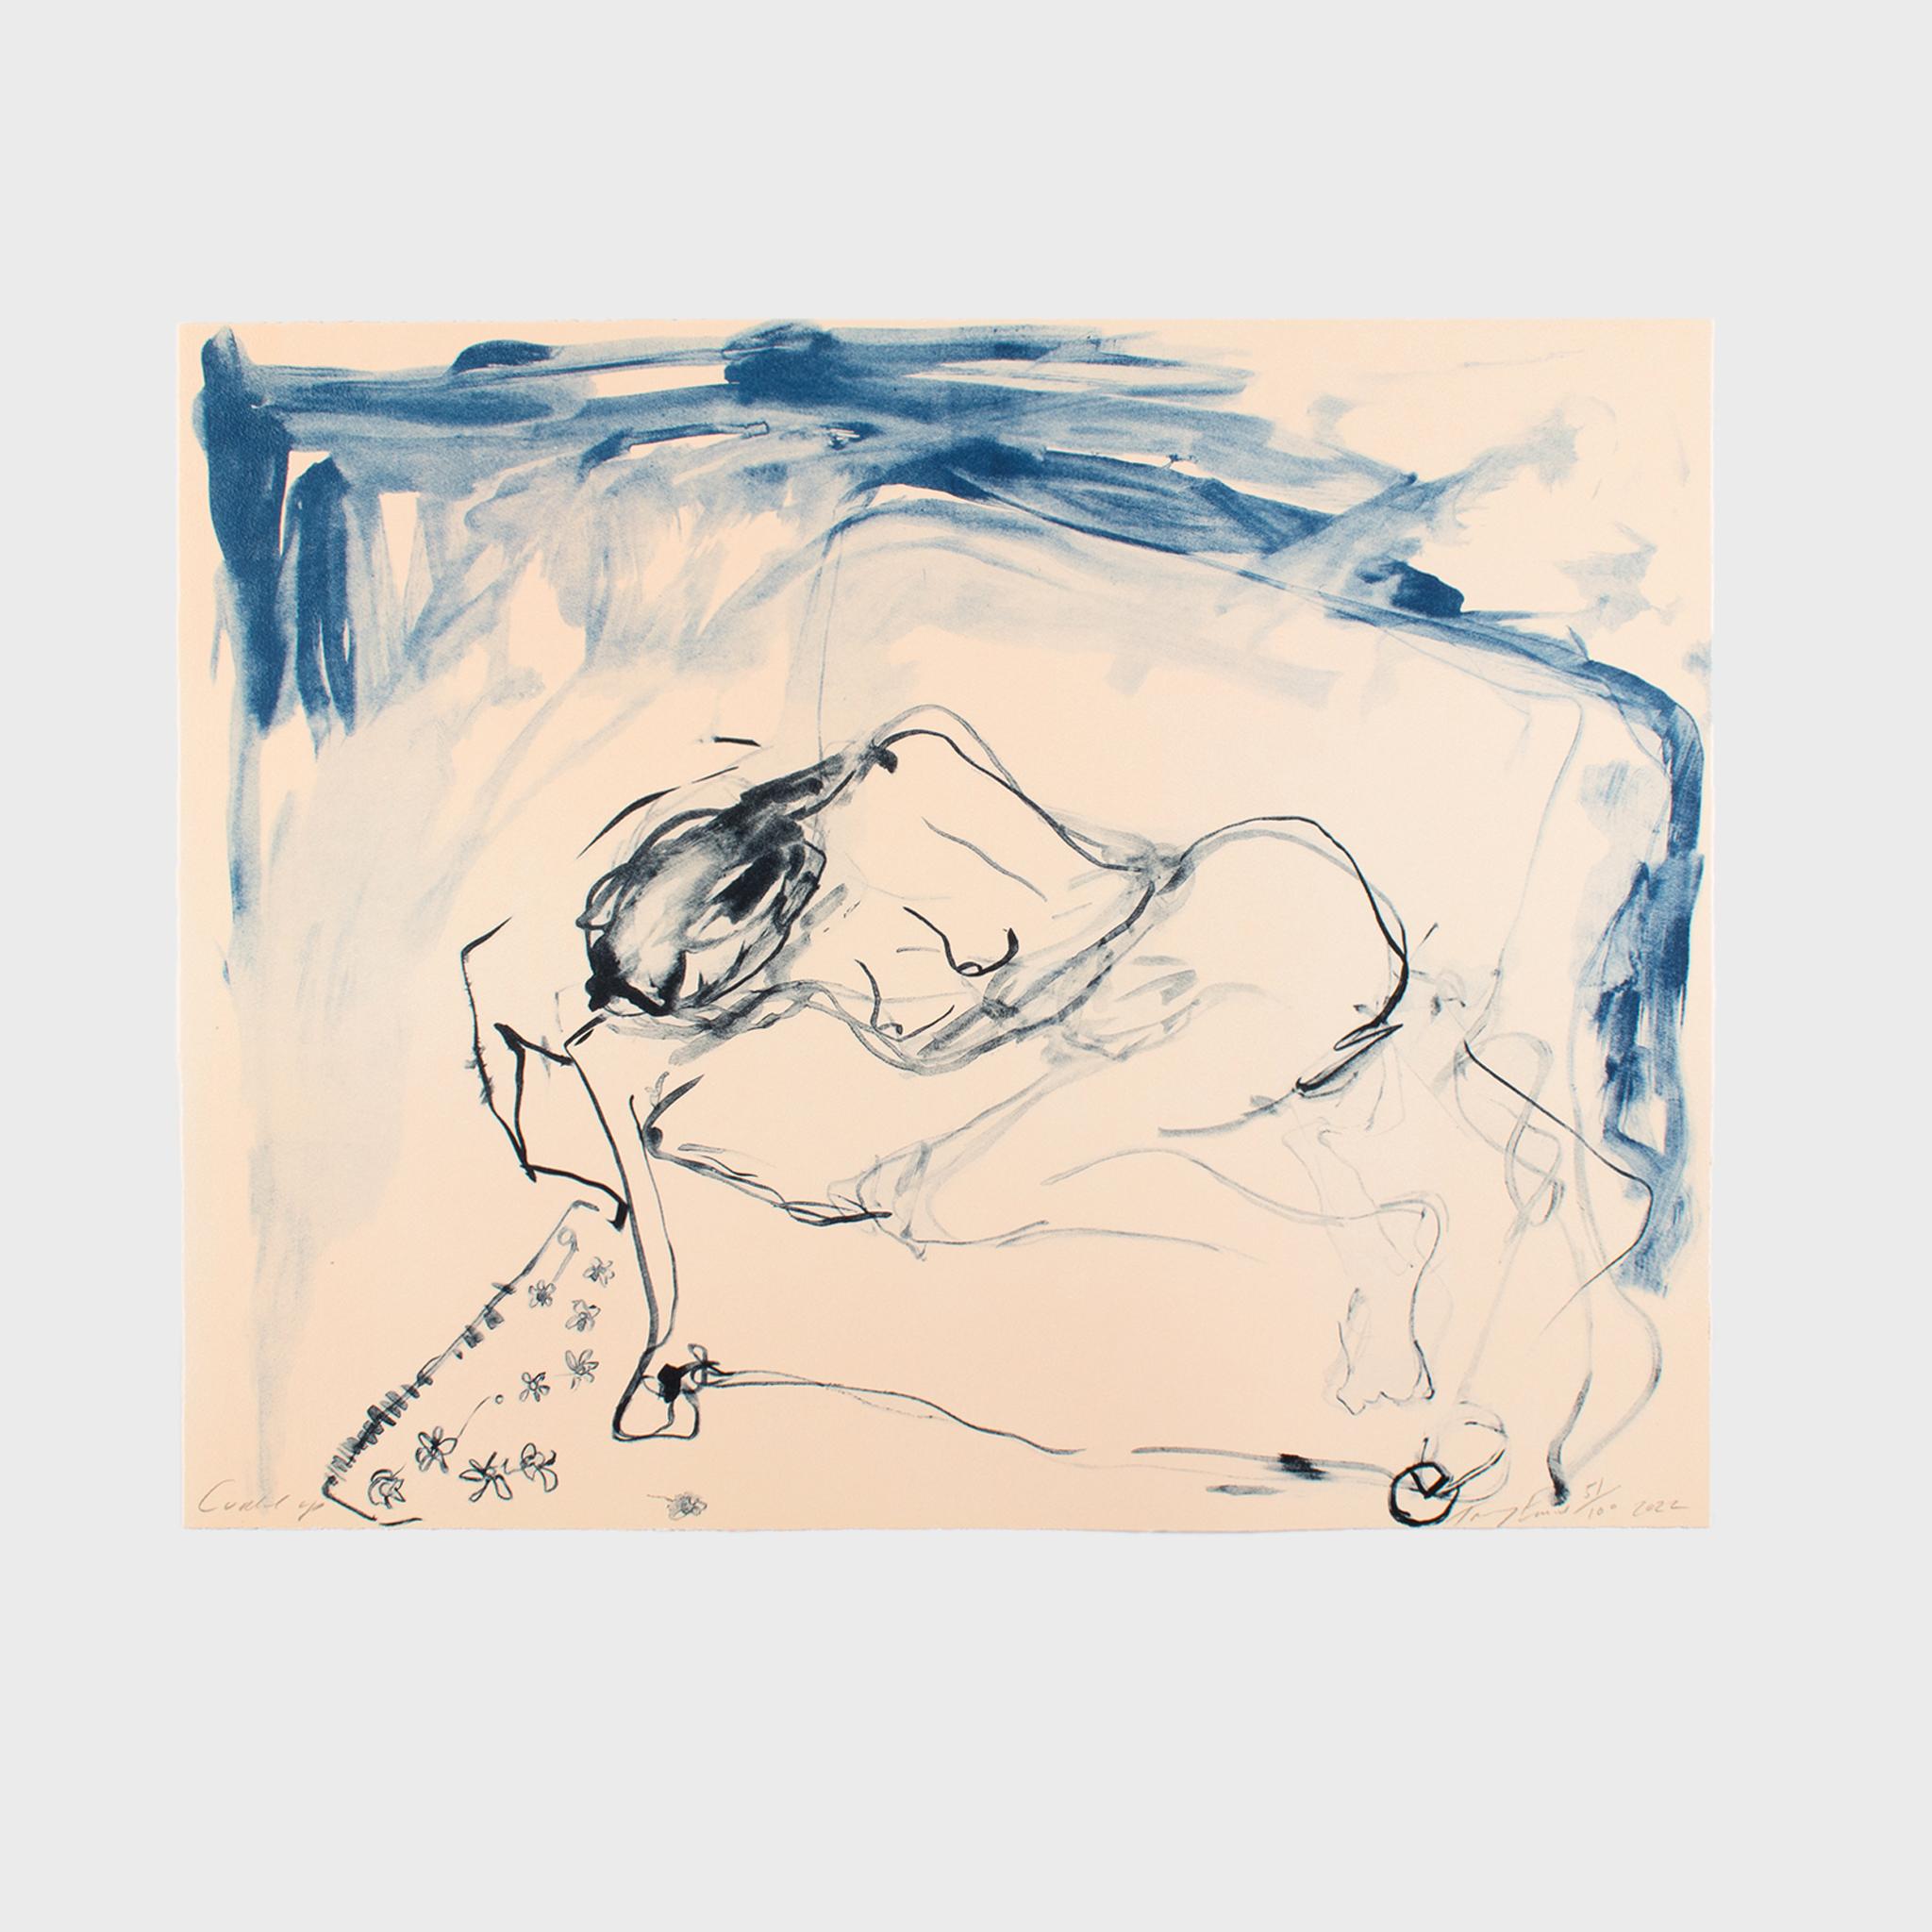 2 colour lithographs on Somerset Velvet Warm White 400gsm
Edition of 100
Signed, numbered and titled on the front
Mint. Sold in the original packaging

Our mission is to connect art collectors to opportunity.
Whether it be figurative, abstract or